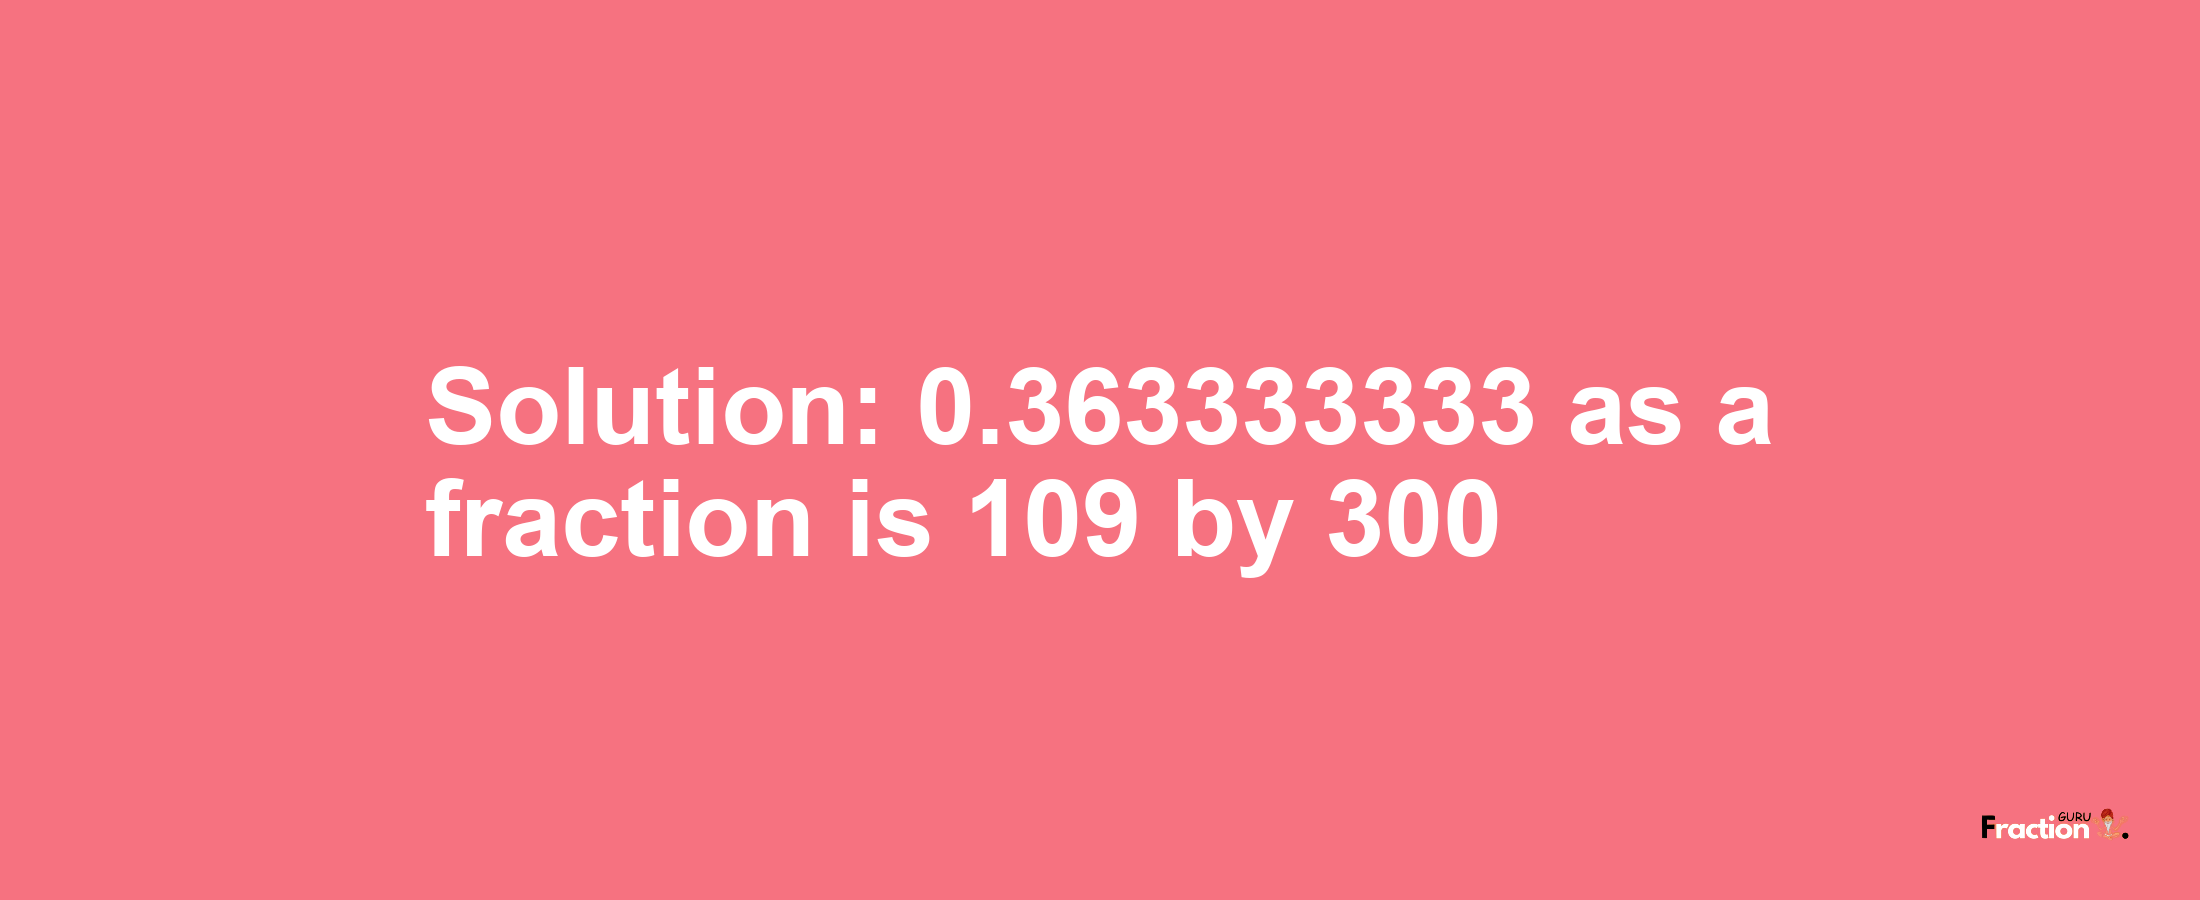 Solution:0.363333333 as a fraction is 109/300